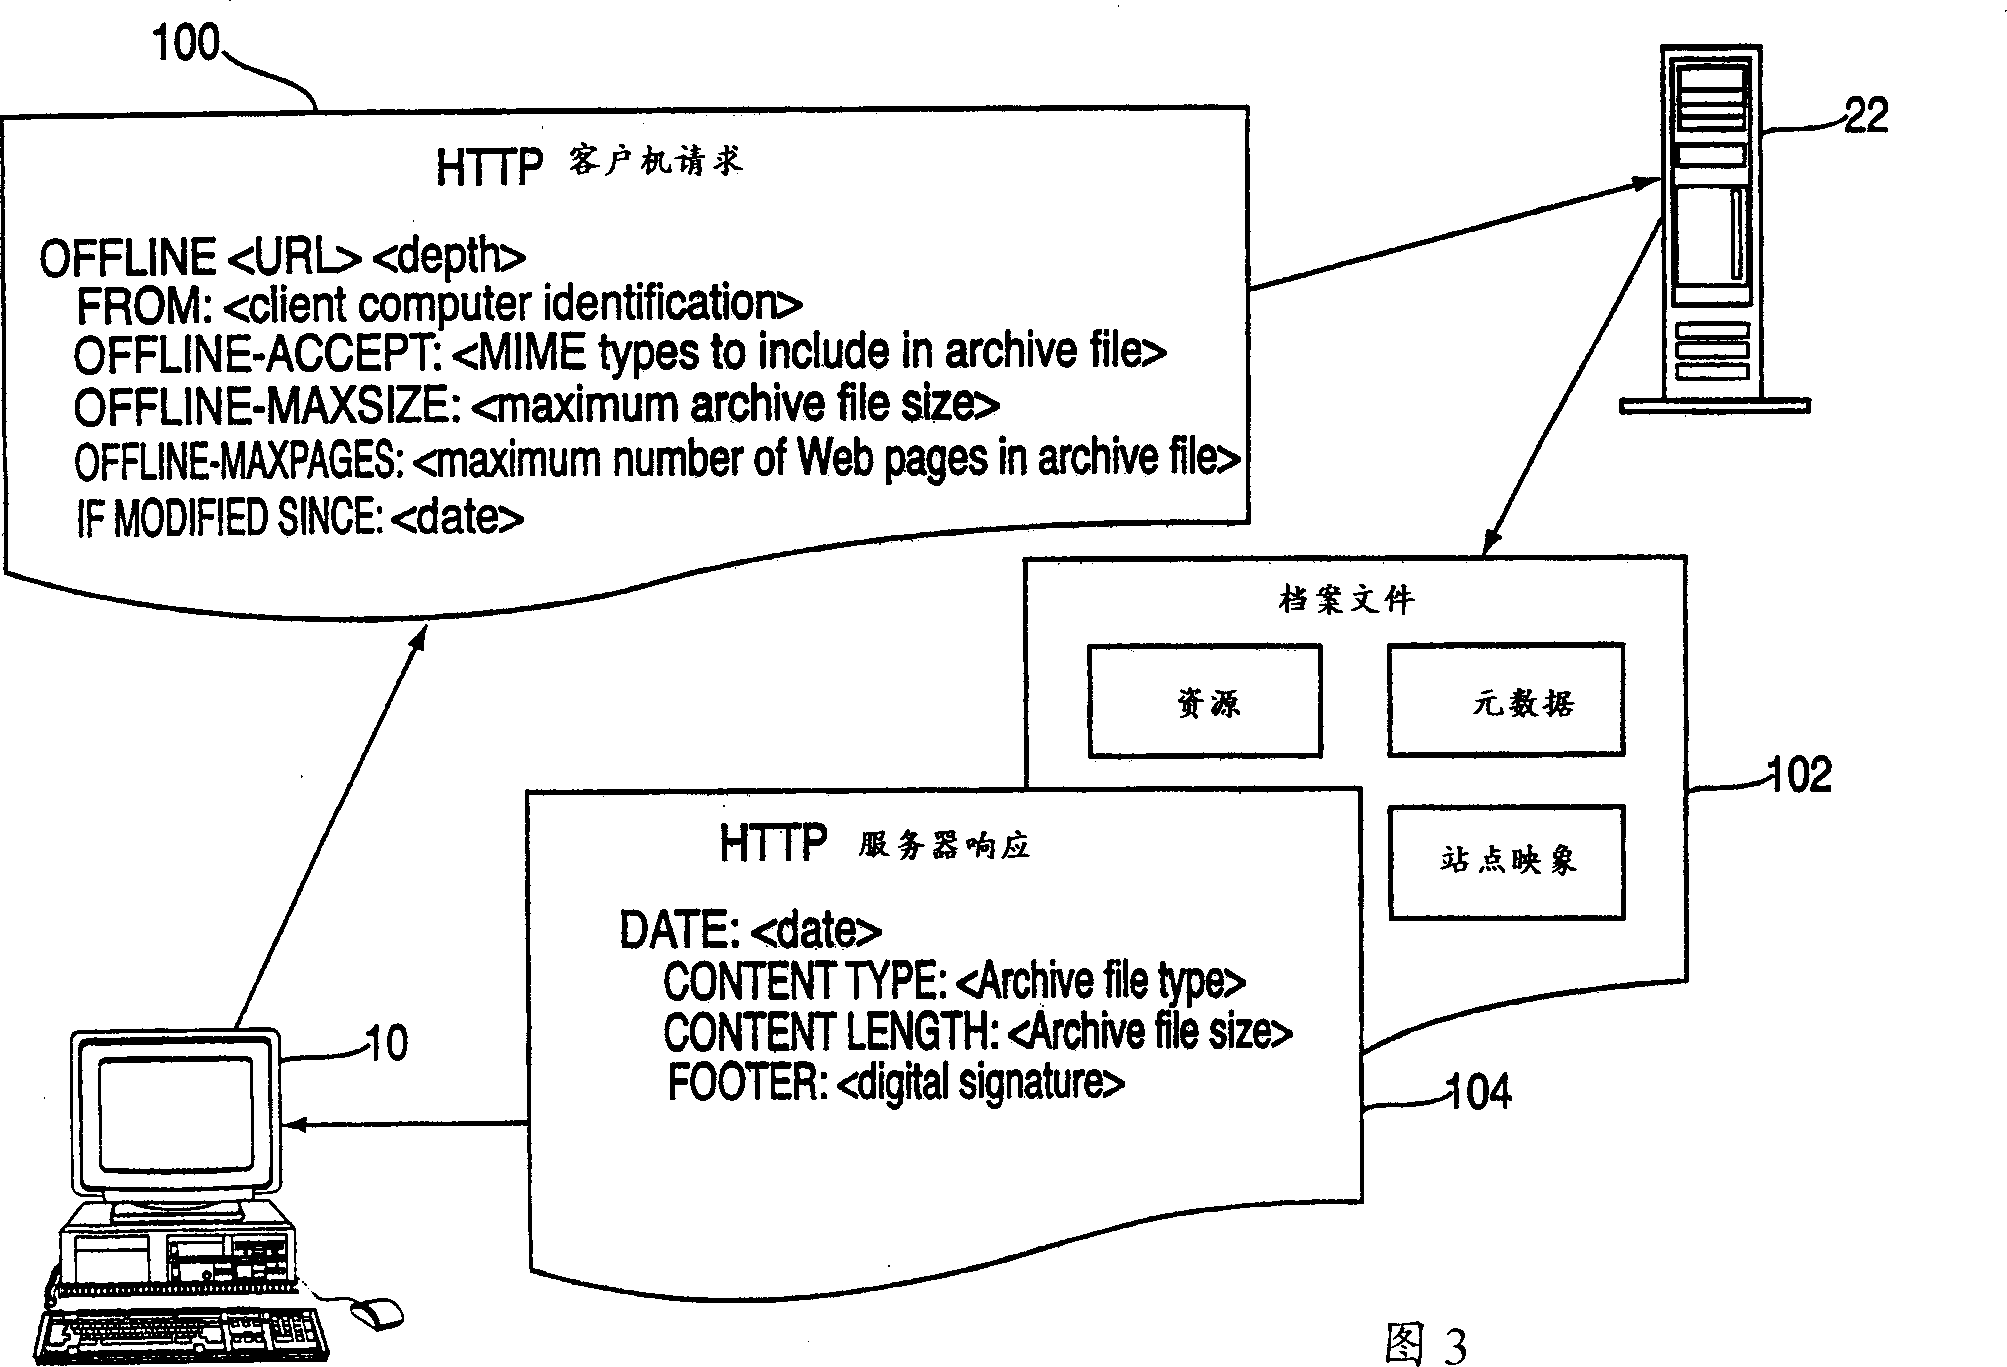 Method for providing resource from network server to client computer